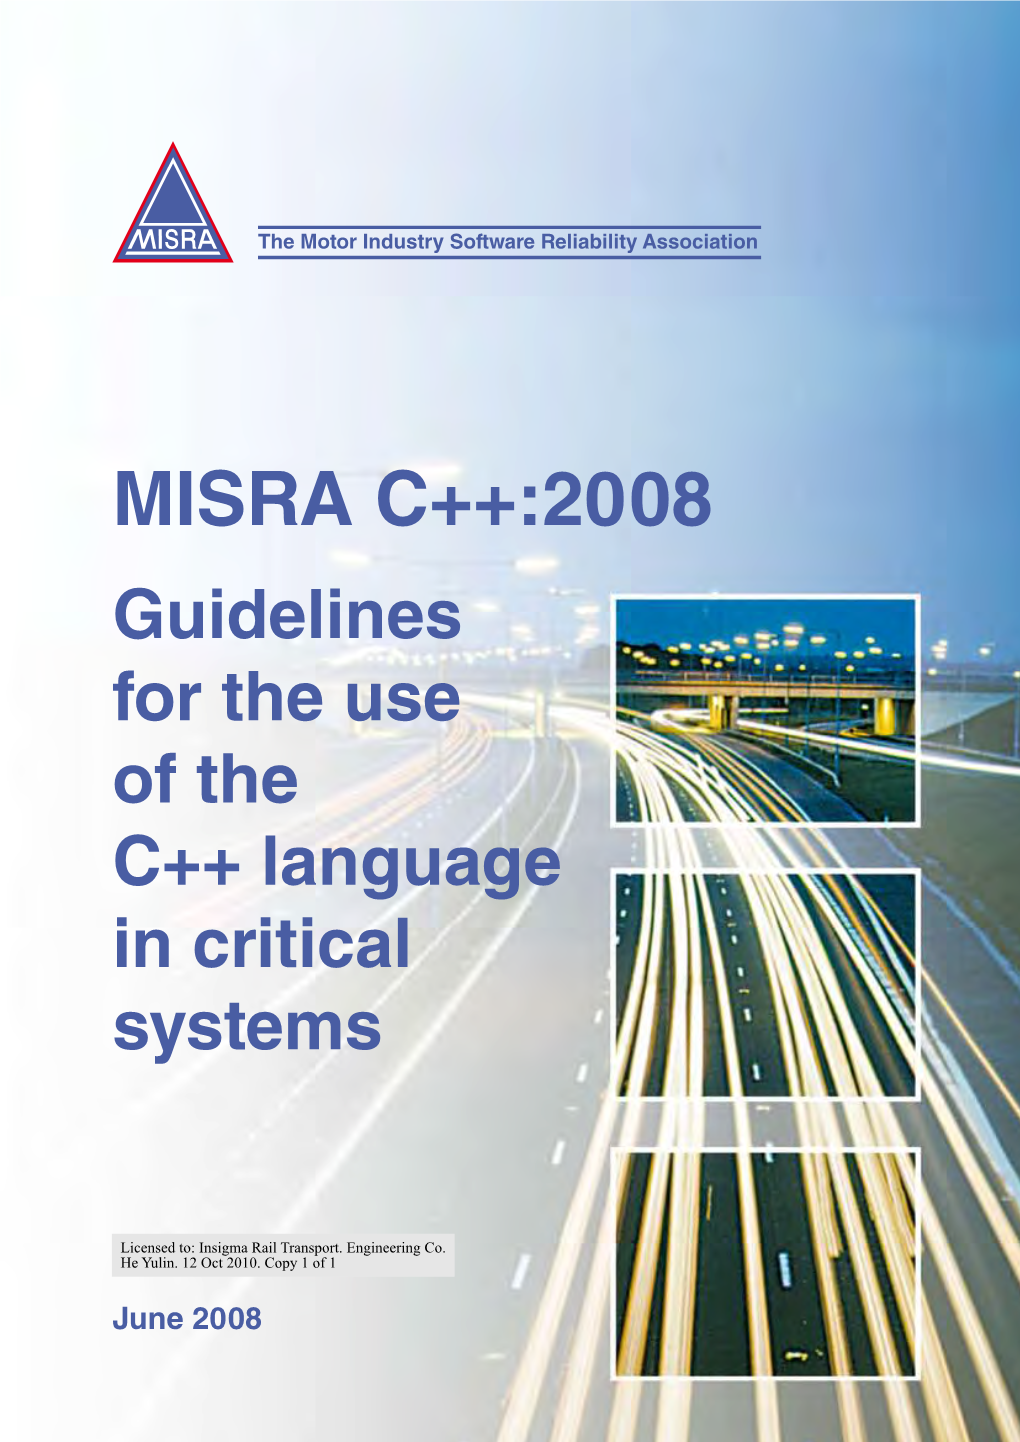 MISRA C++:2008 Guidelines for the Use of the C++ Language in Critical Systems